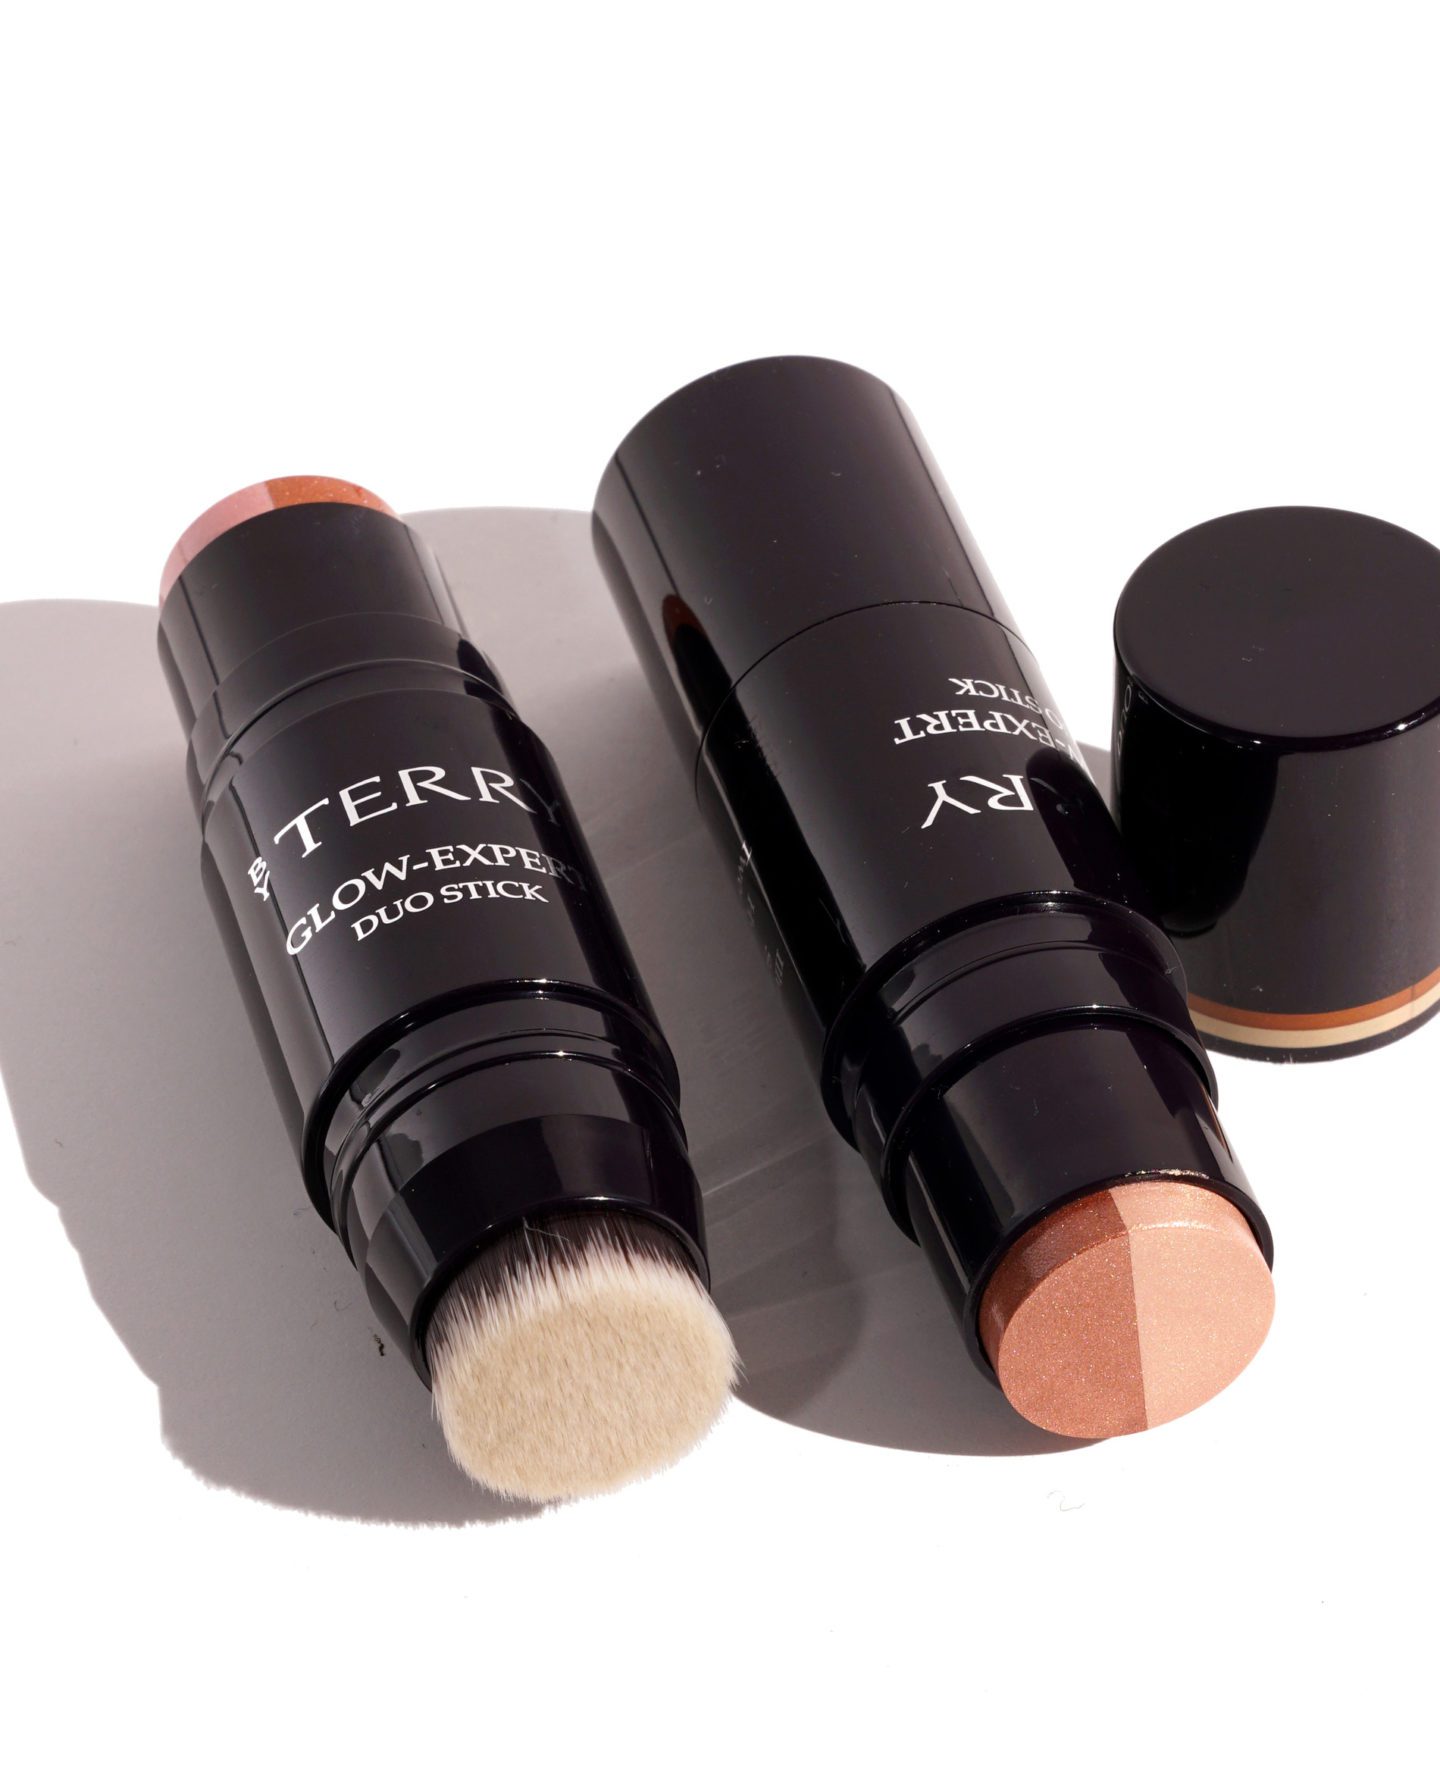 By Terry Glow-Expert Highlighters in Amber Light and Beach Glow